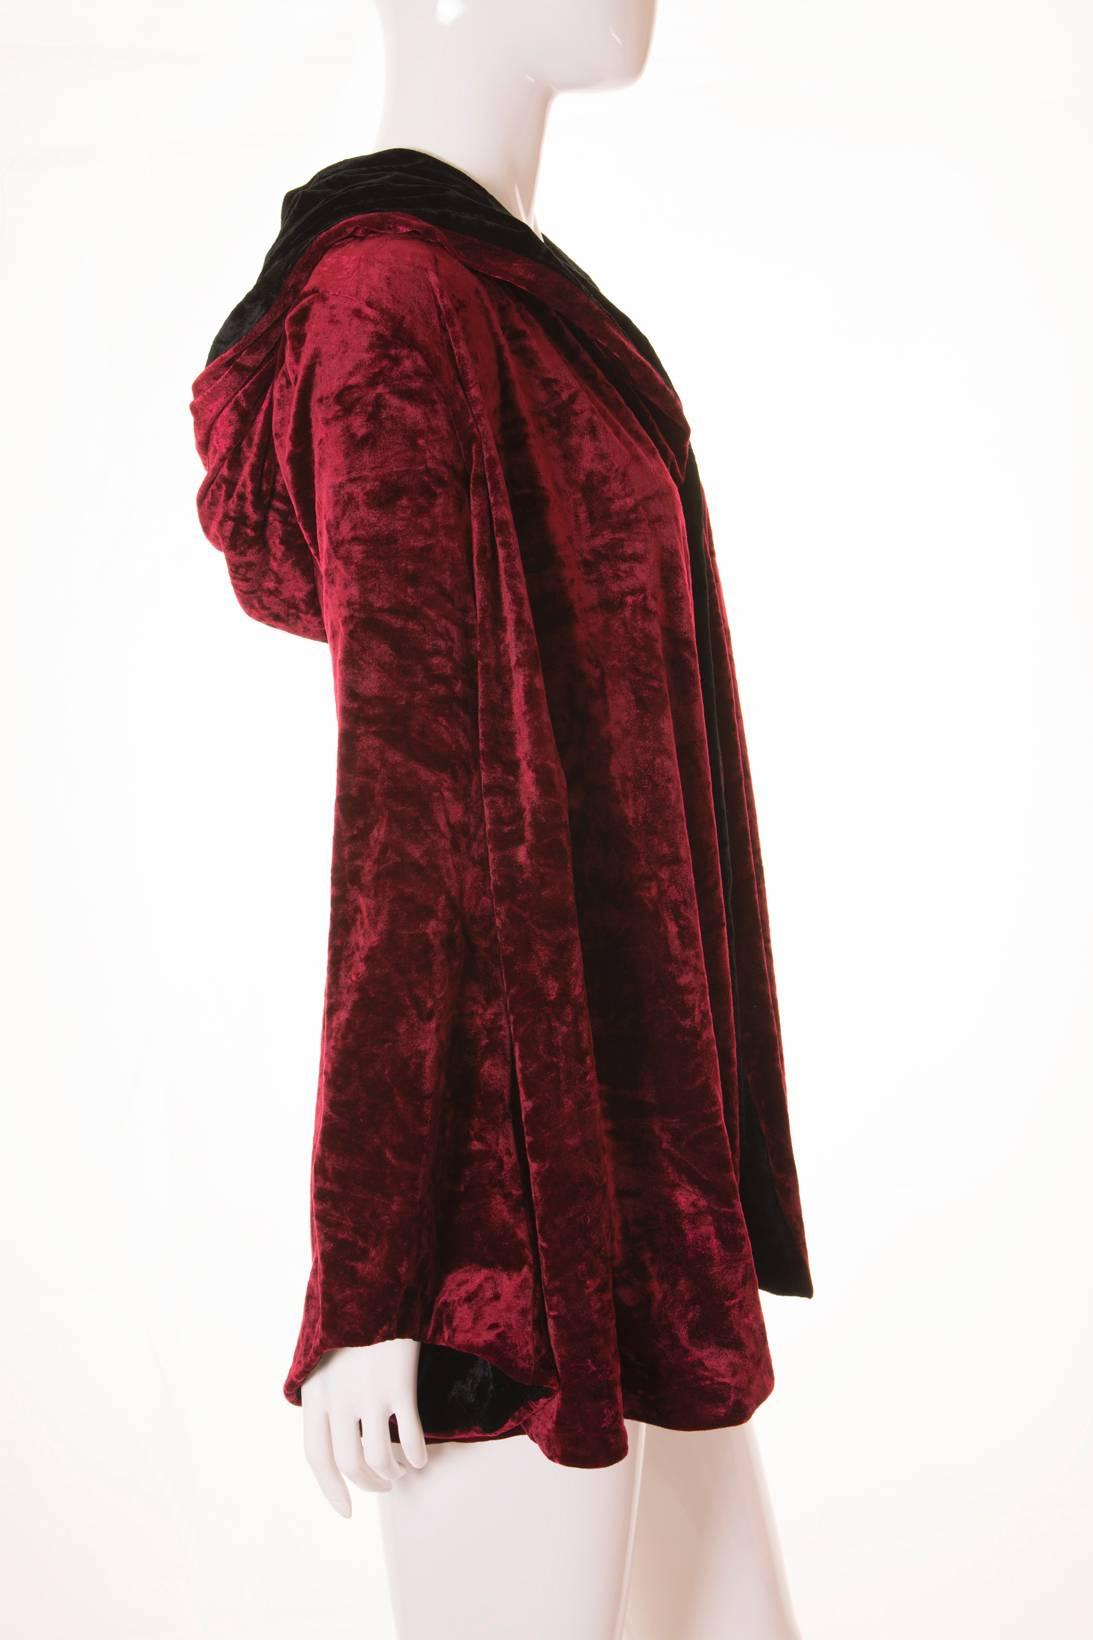 This hooded velvet cape jacket by Norma Kamali is made of sumptuous maroon and black velvet. The contrasting black crushed velvet lining is visible on hood and also on the collars. Deep hood. Exaggerated trumpet sleeves. Stretch in fabric. The front